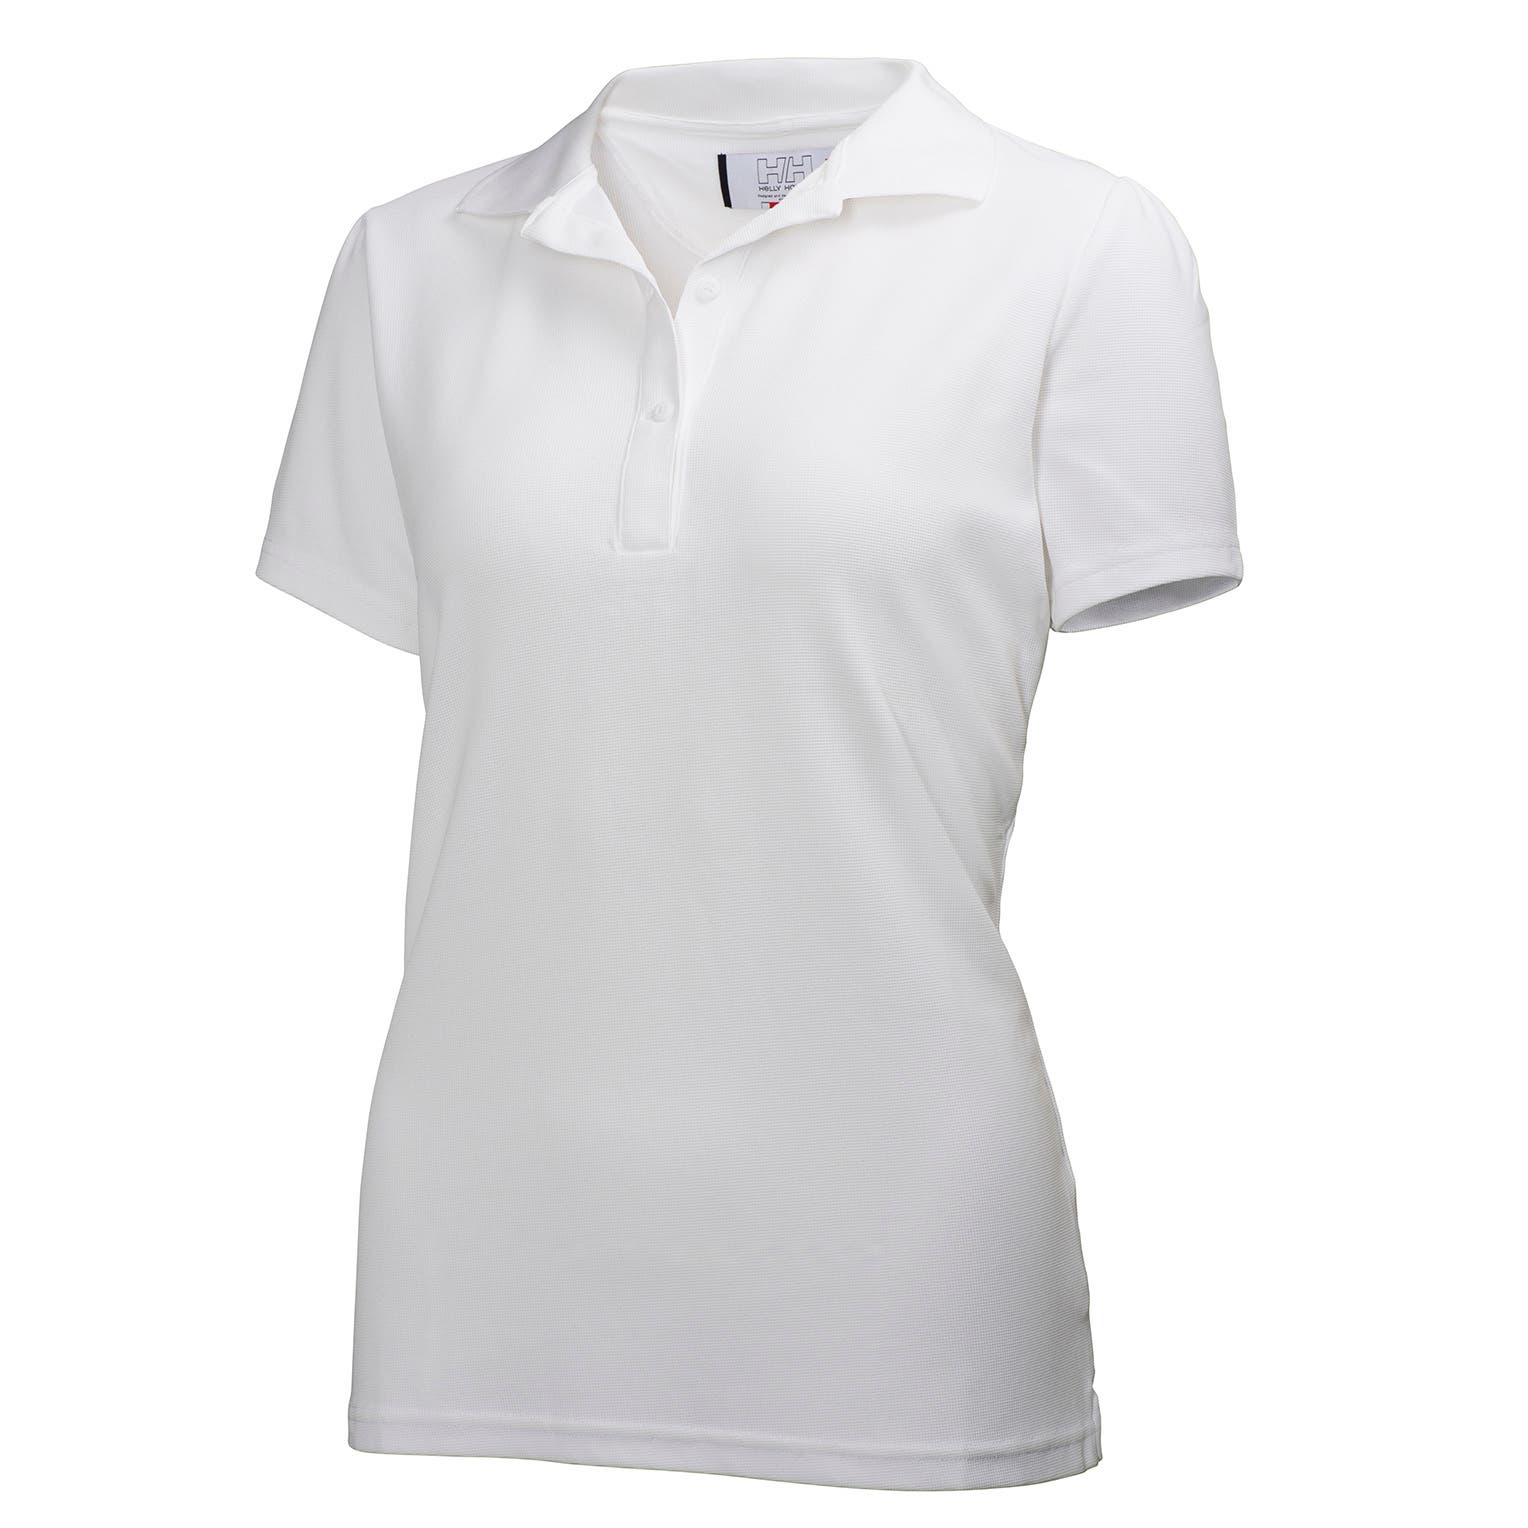 Helly Hansen Women's Tech Crew Polo in White from the front